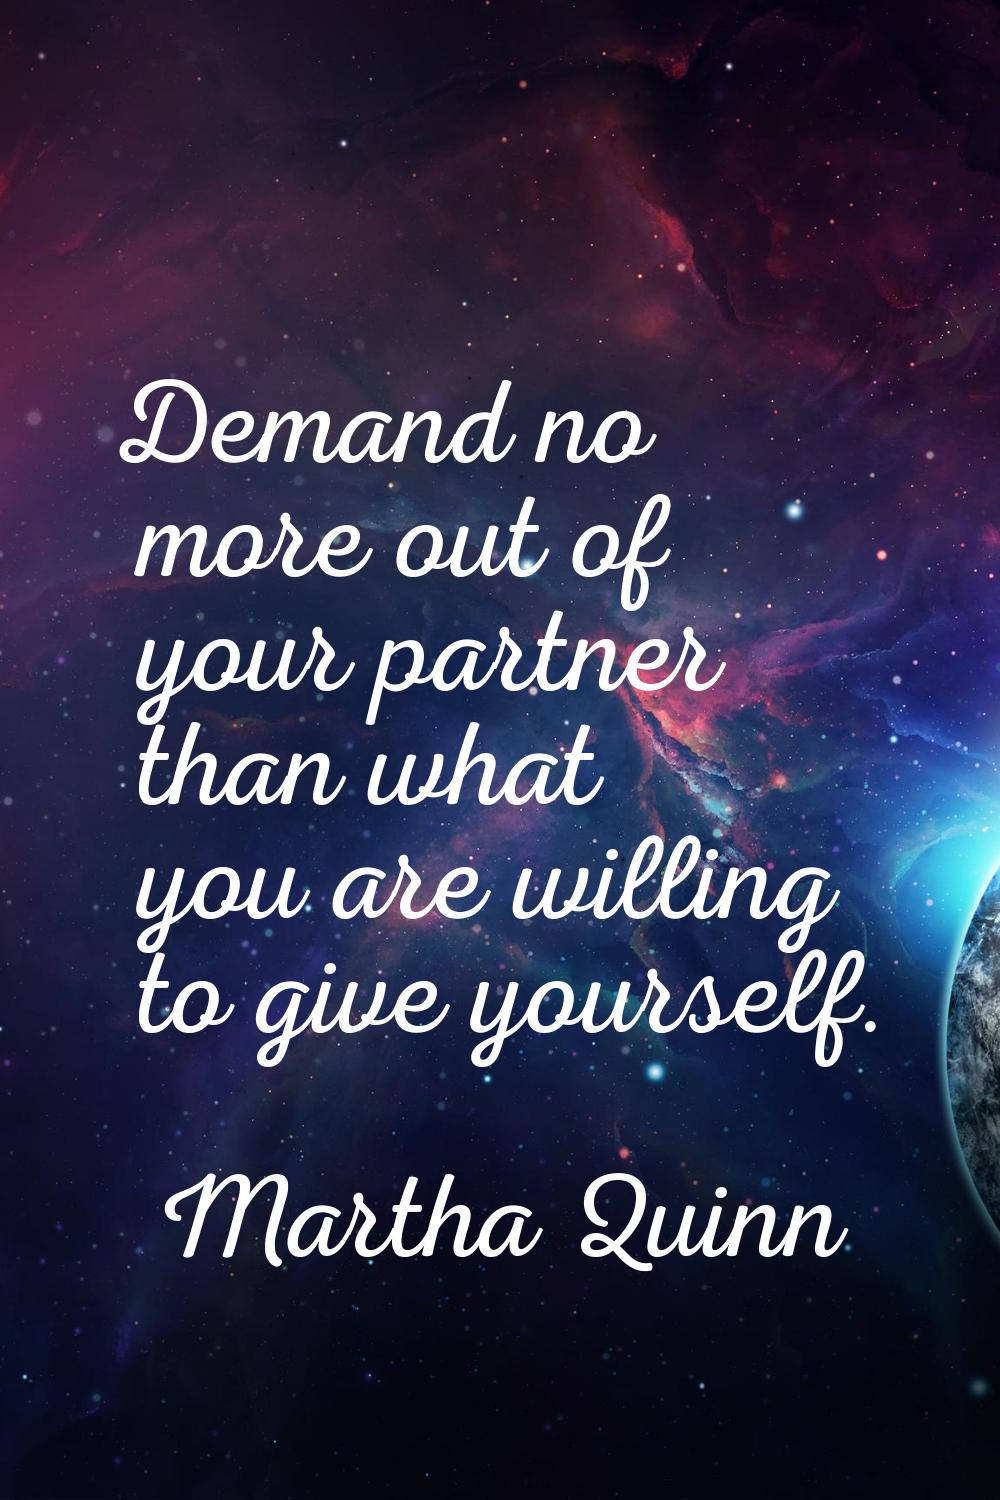 Demand no more out of your partner than what you are willing to give yourself.